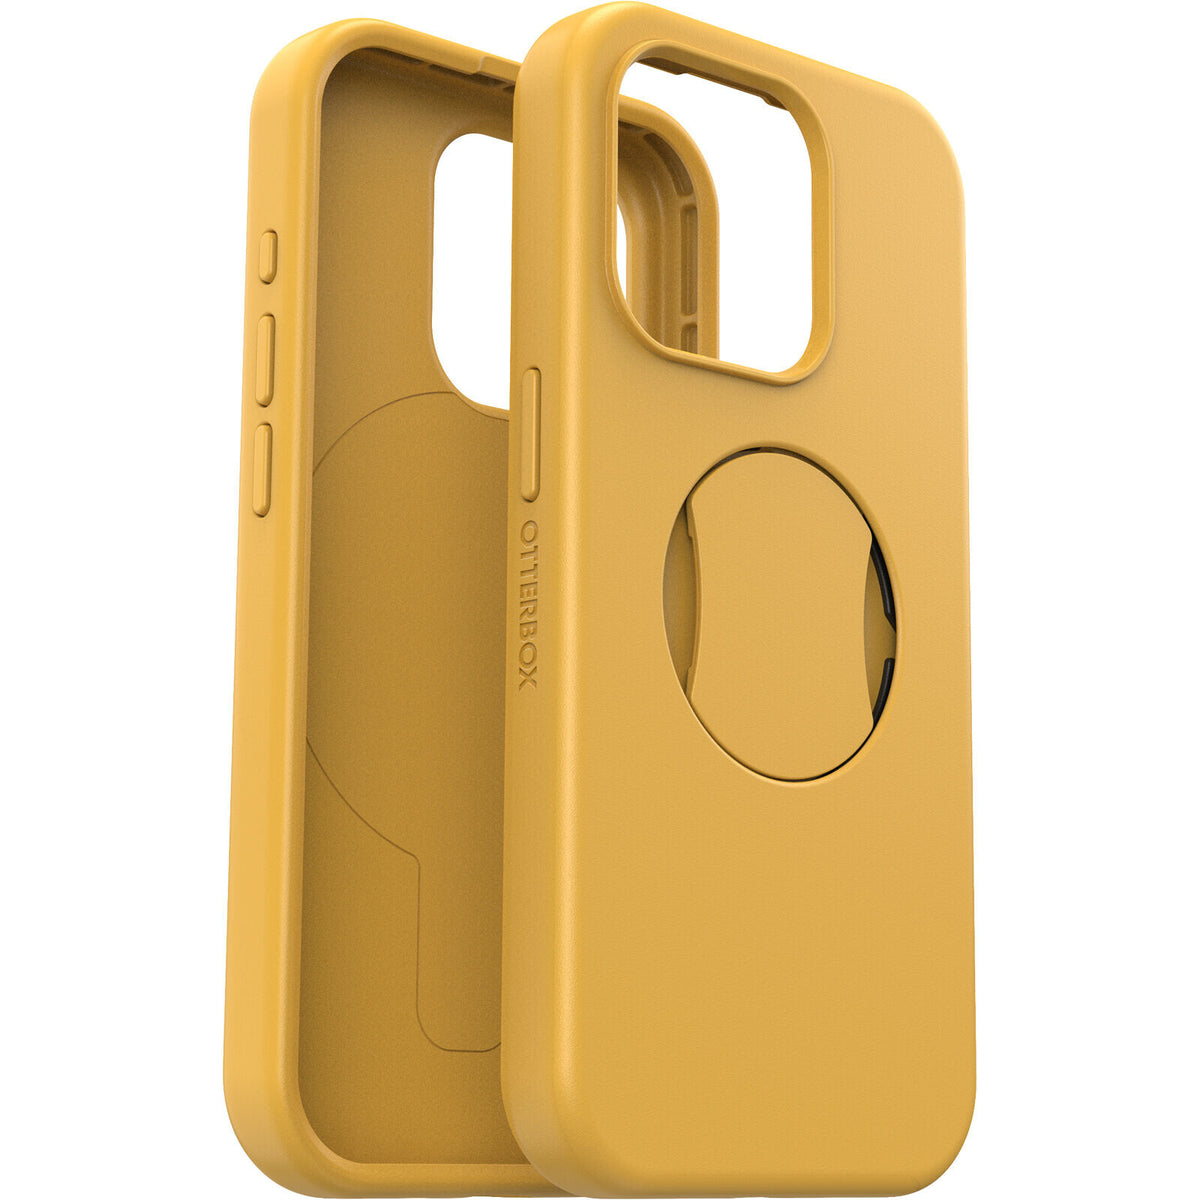 OtterBox OtterGrip Symmetry Series for iPhone 15 Pro in Aspen Gleam 2.0 (Yellow)